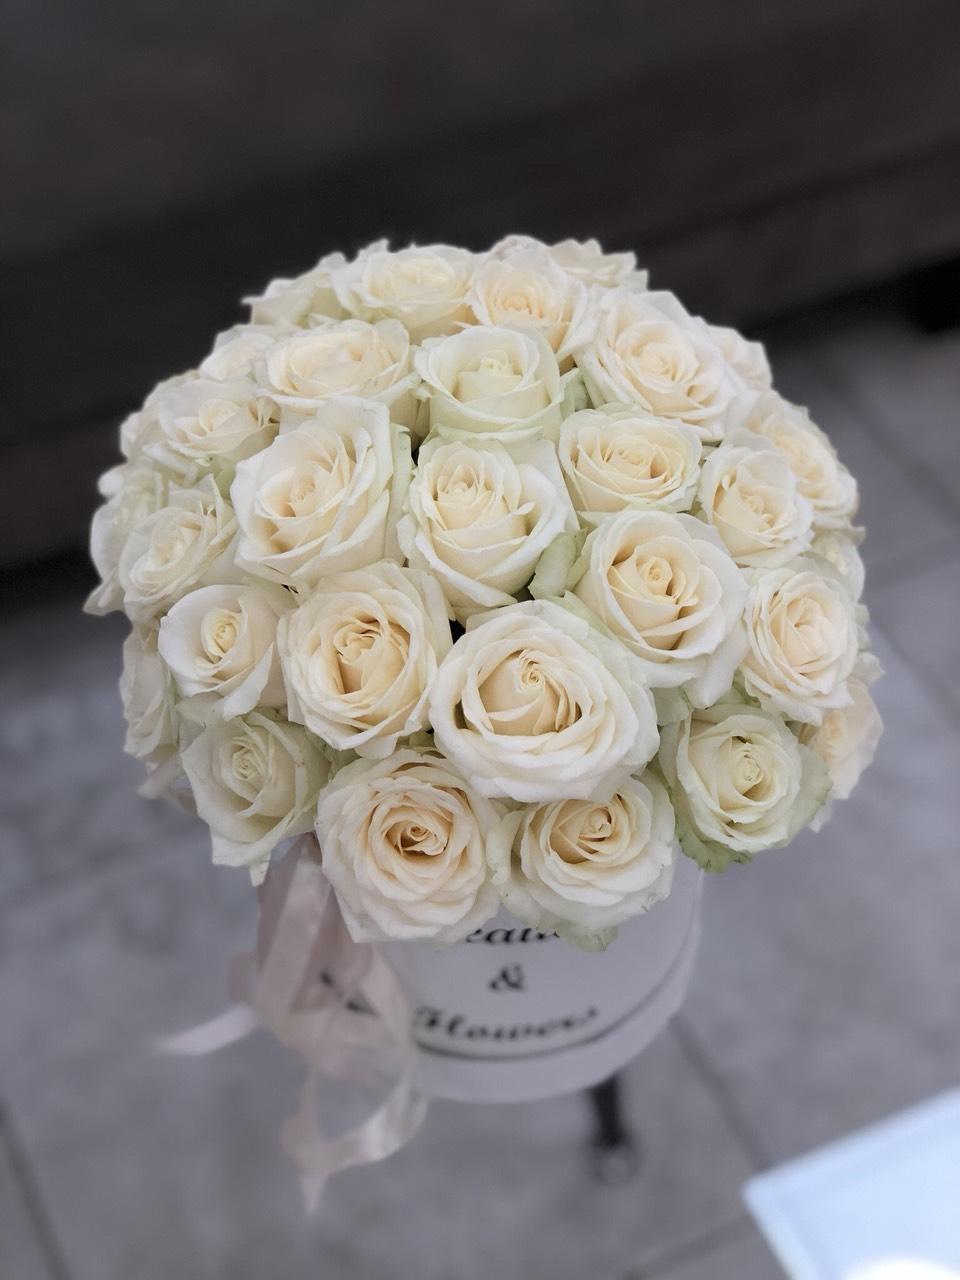 25 white roses in a box - picture 2